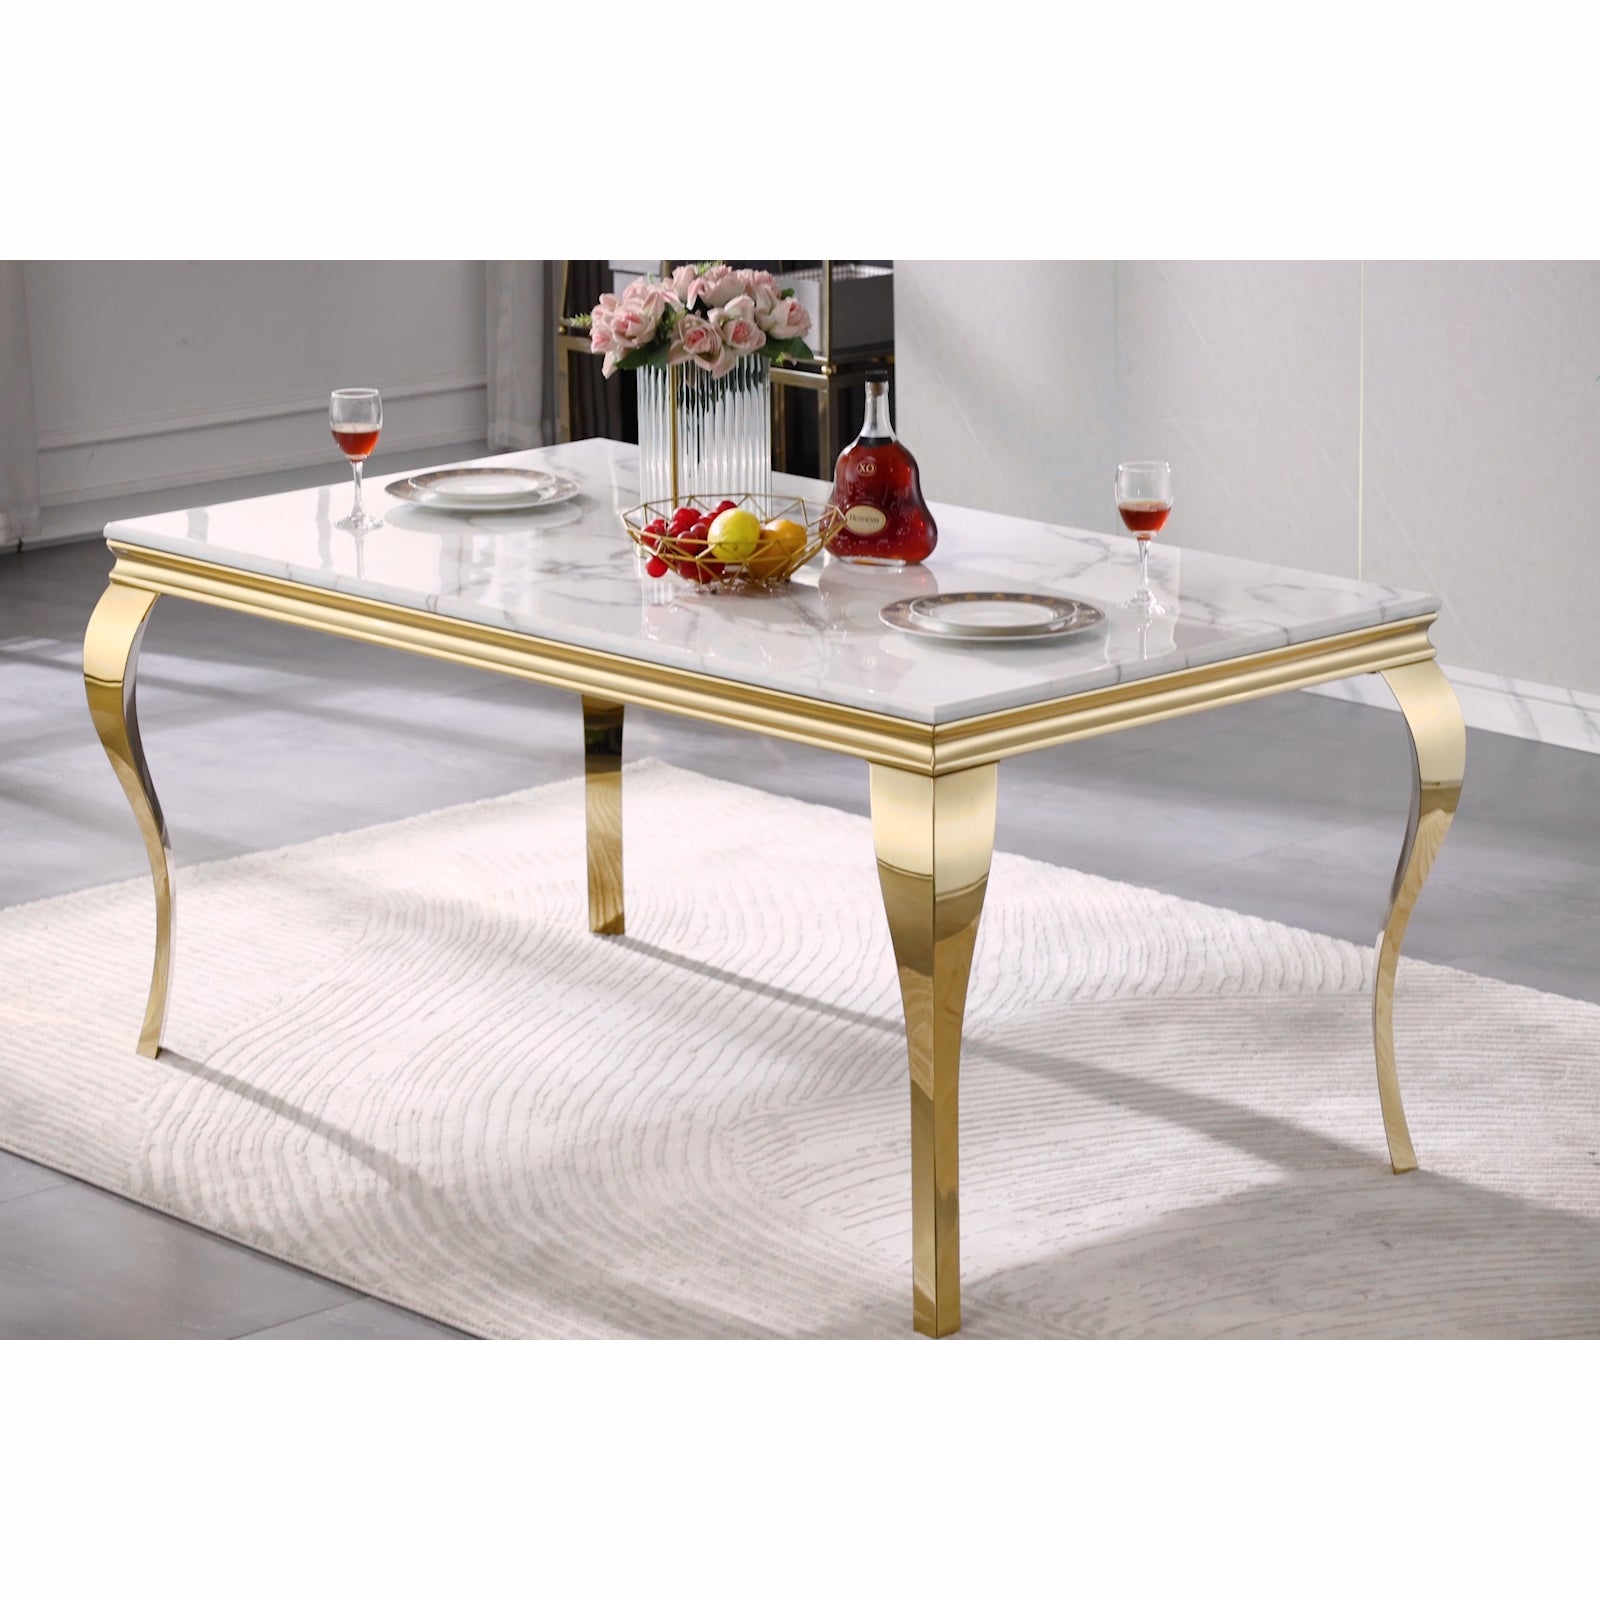 695 Set | AUZ White and gold Dining room Sets for 6